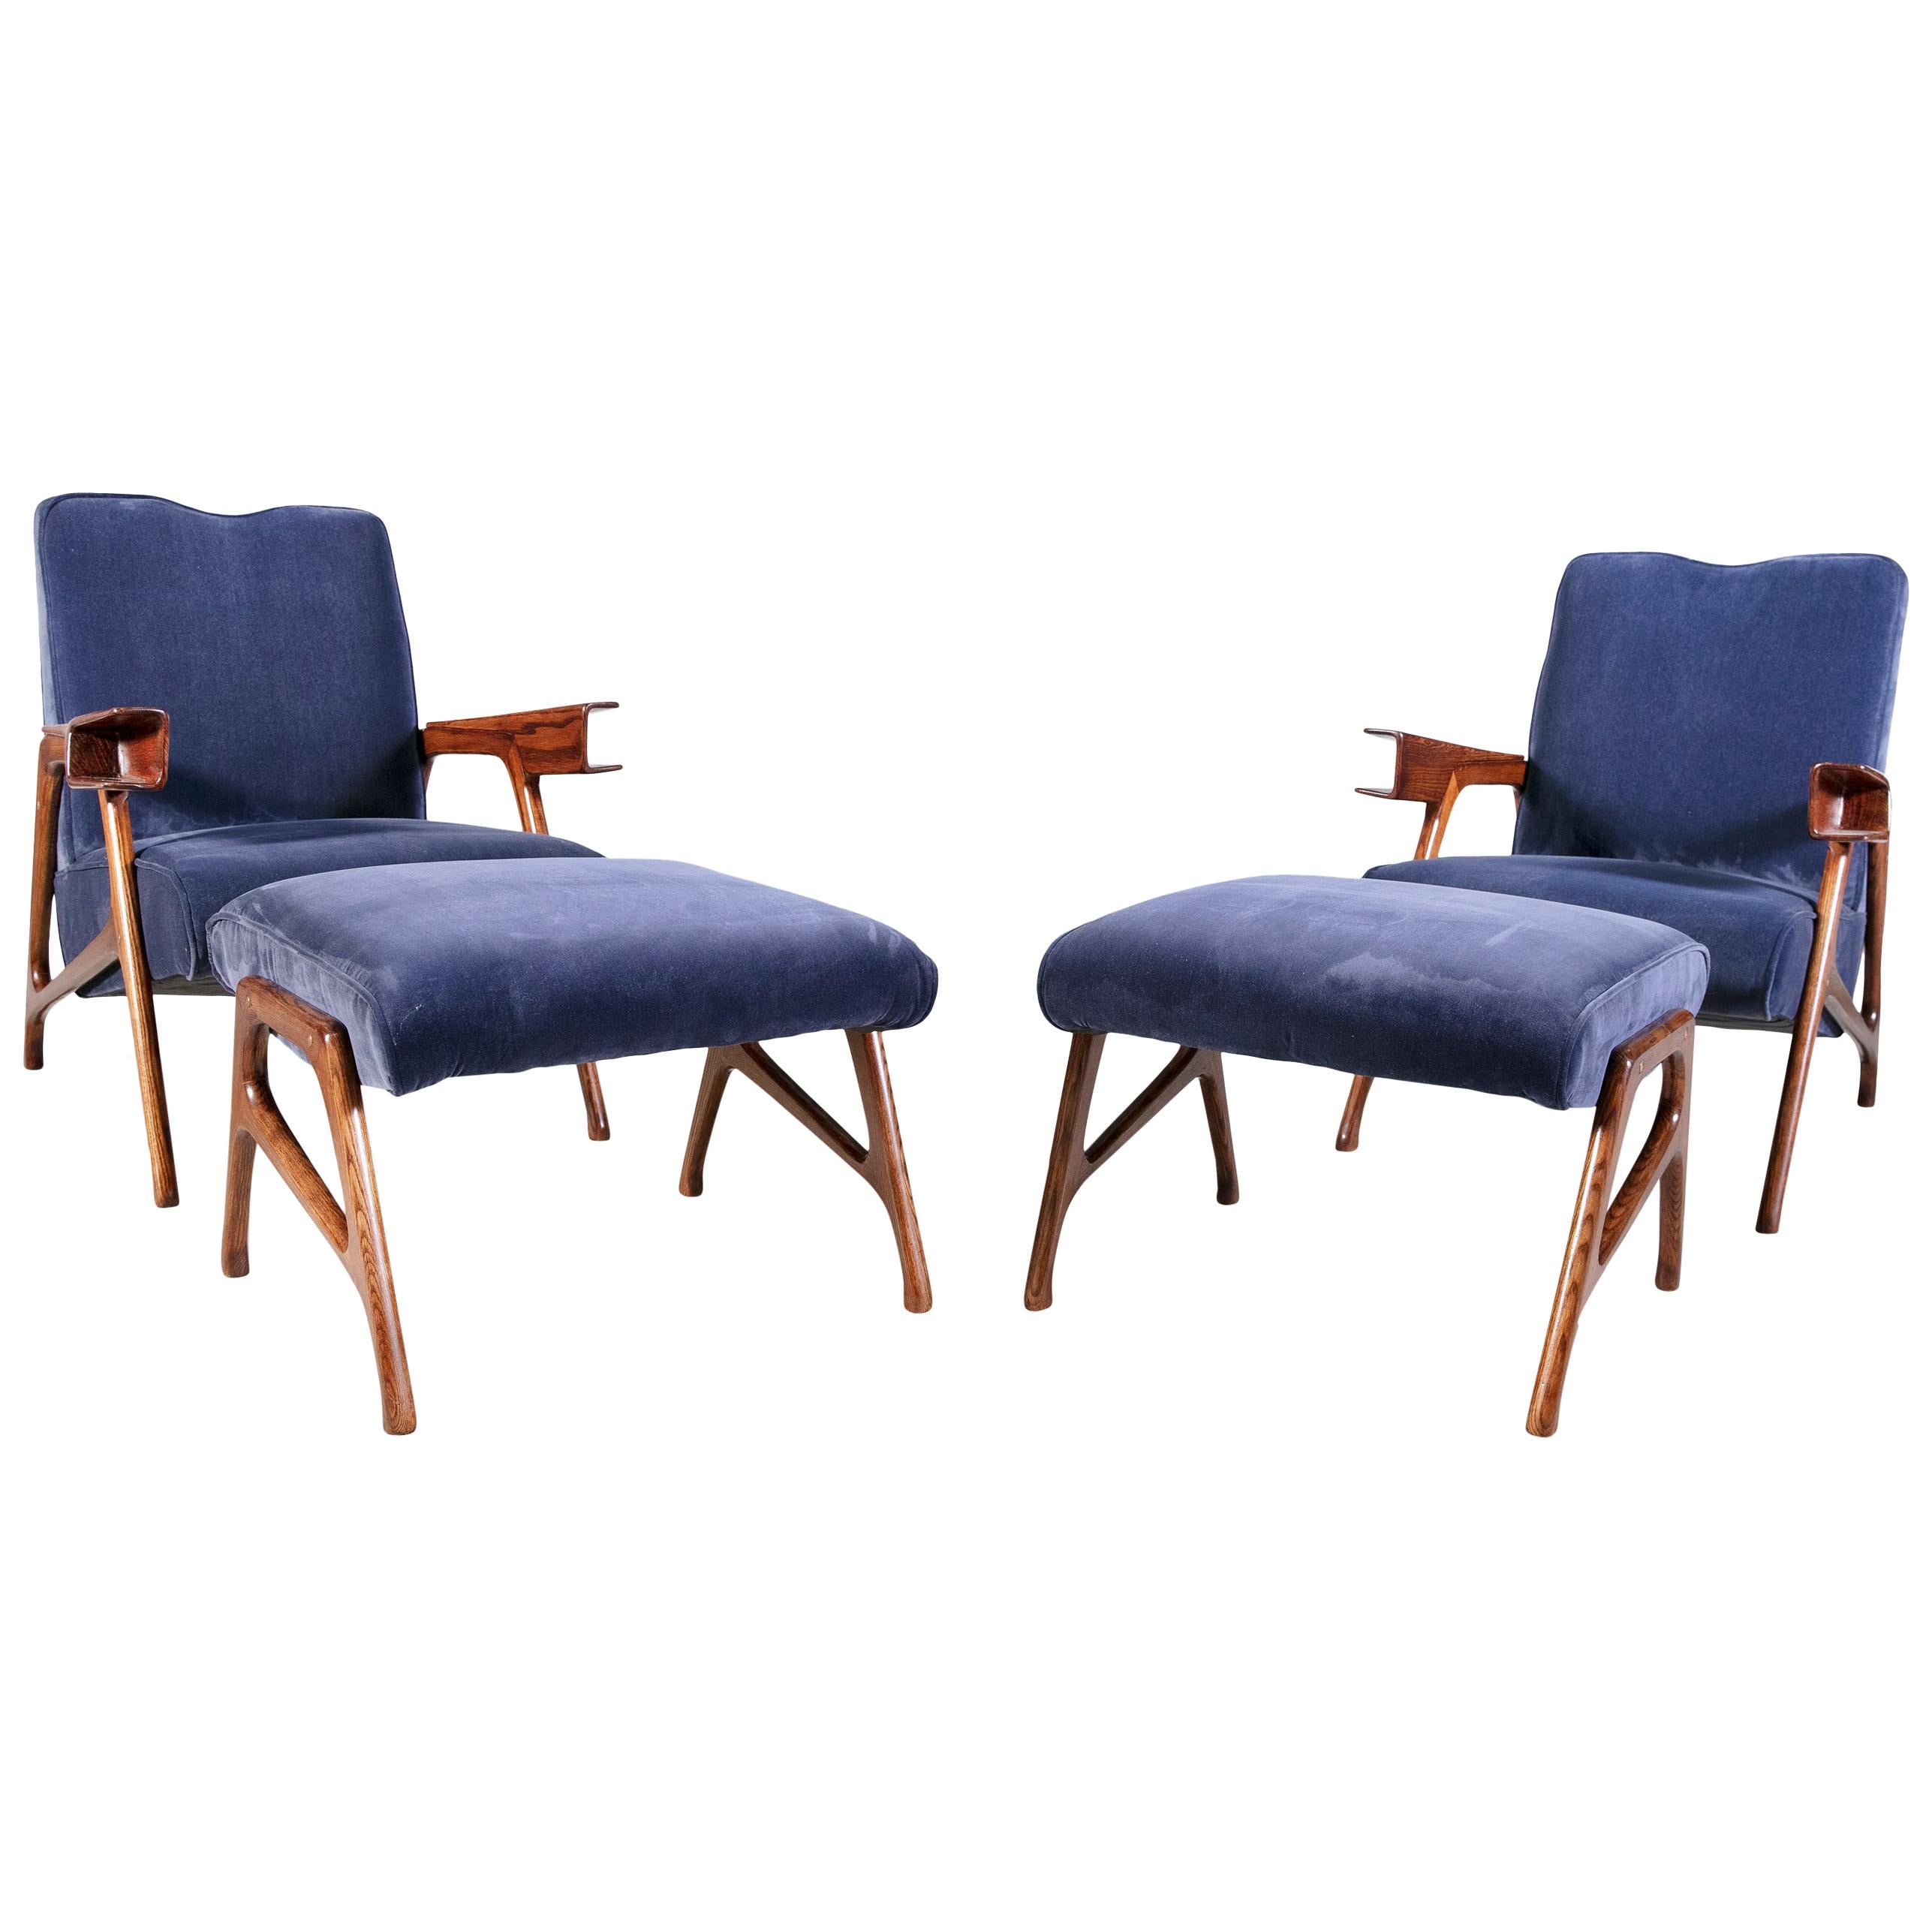 A very rare pair of solid oak Italian mid-20th century armchairs and matching ottomans by Augusto Romano. The chairs and ottomans have been professionally re-covered in a plush, blue, velvet and the wood re-polished.
These armchairs and ottomans